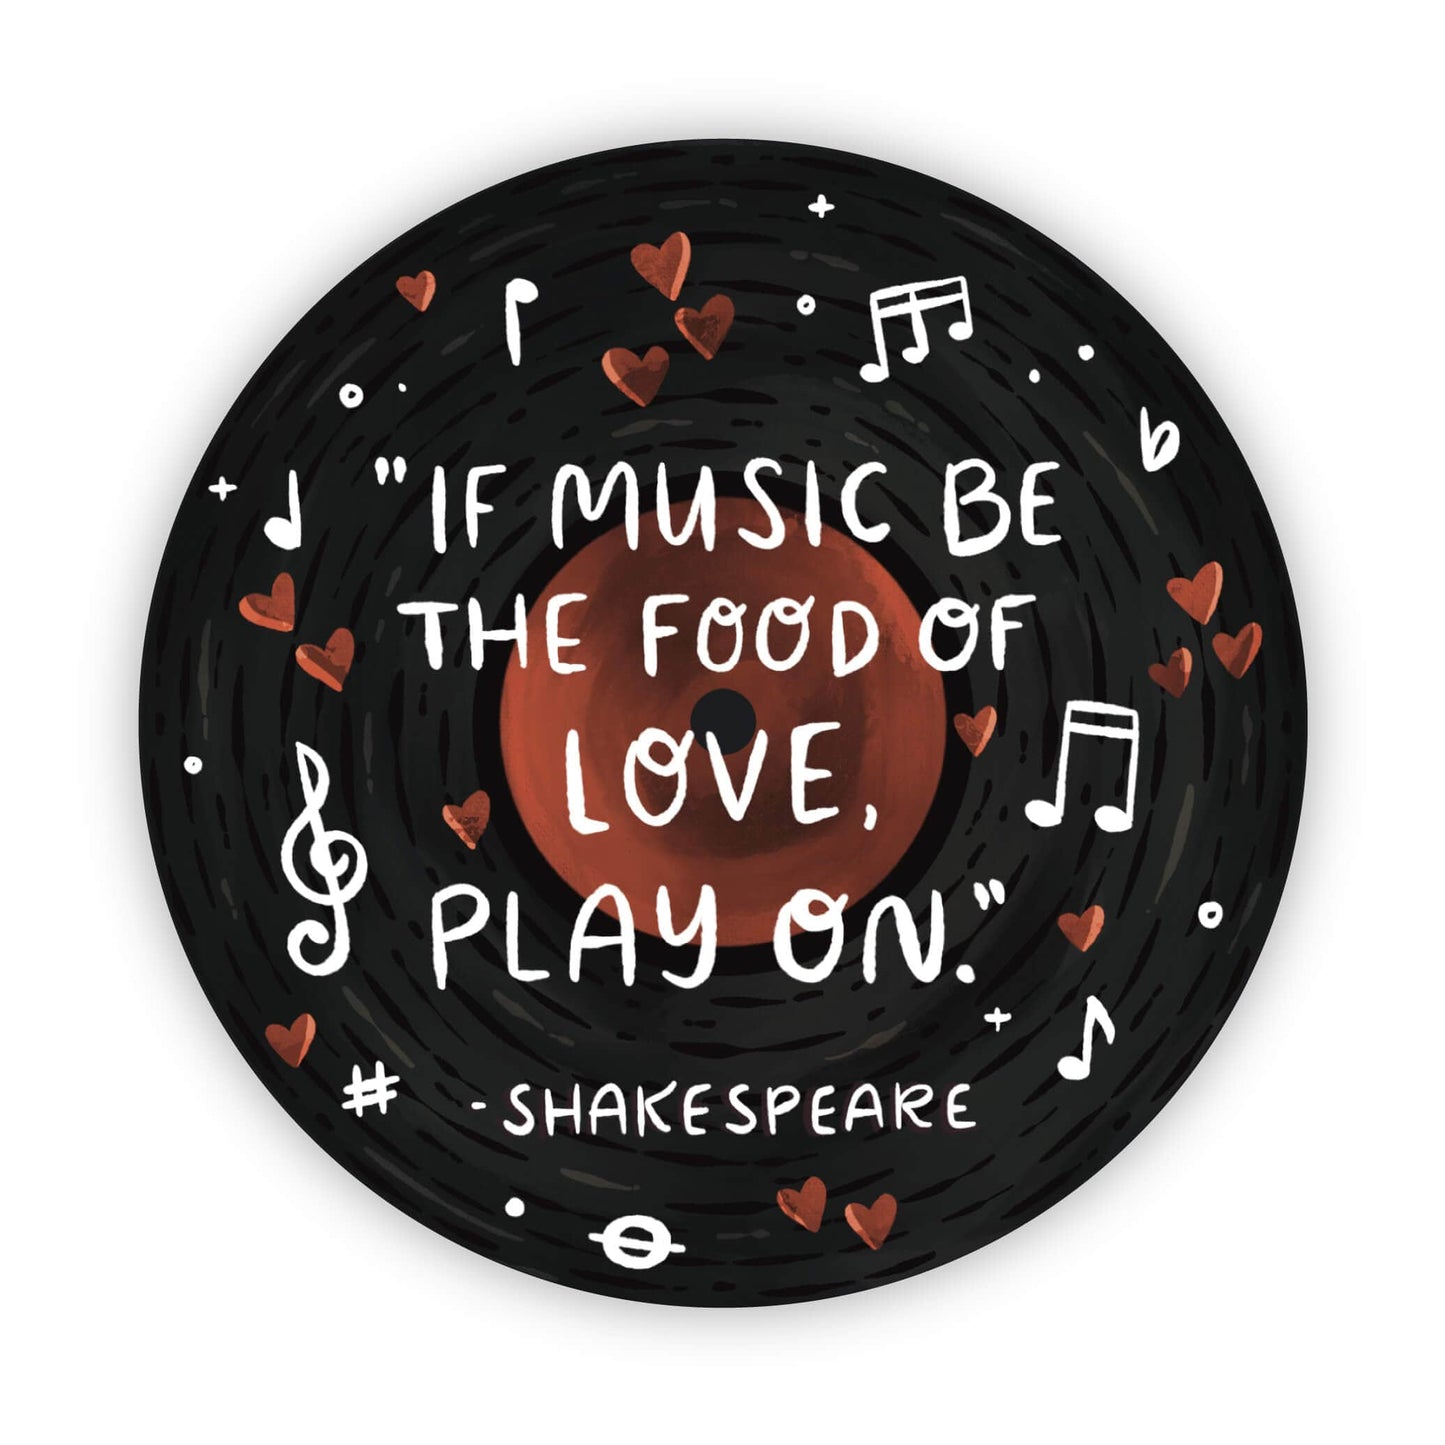 If Music Be the Food of Love, Play On (Shakespeare) Sticker